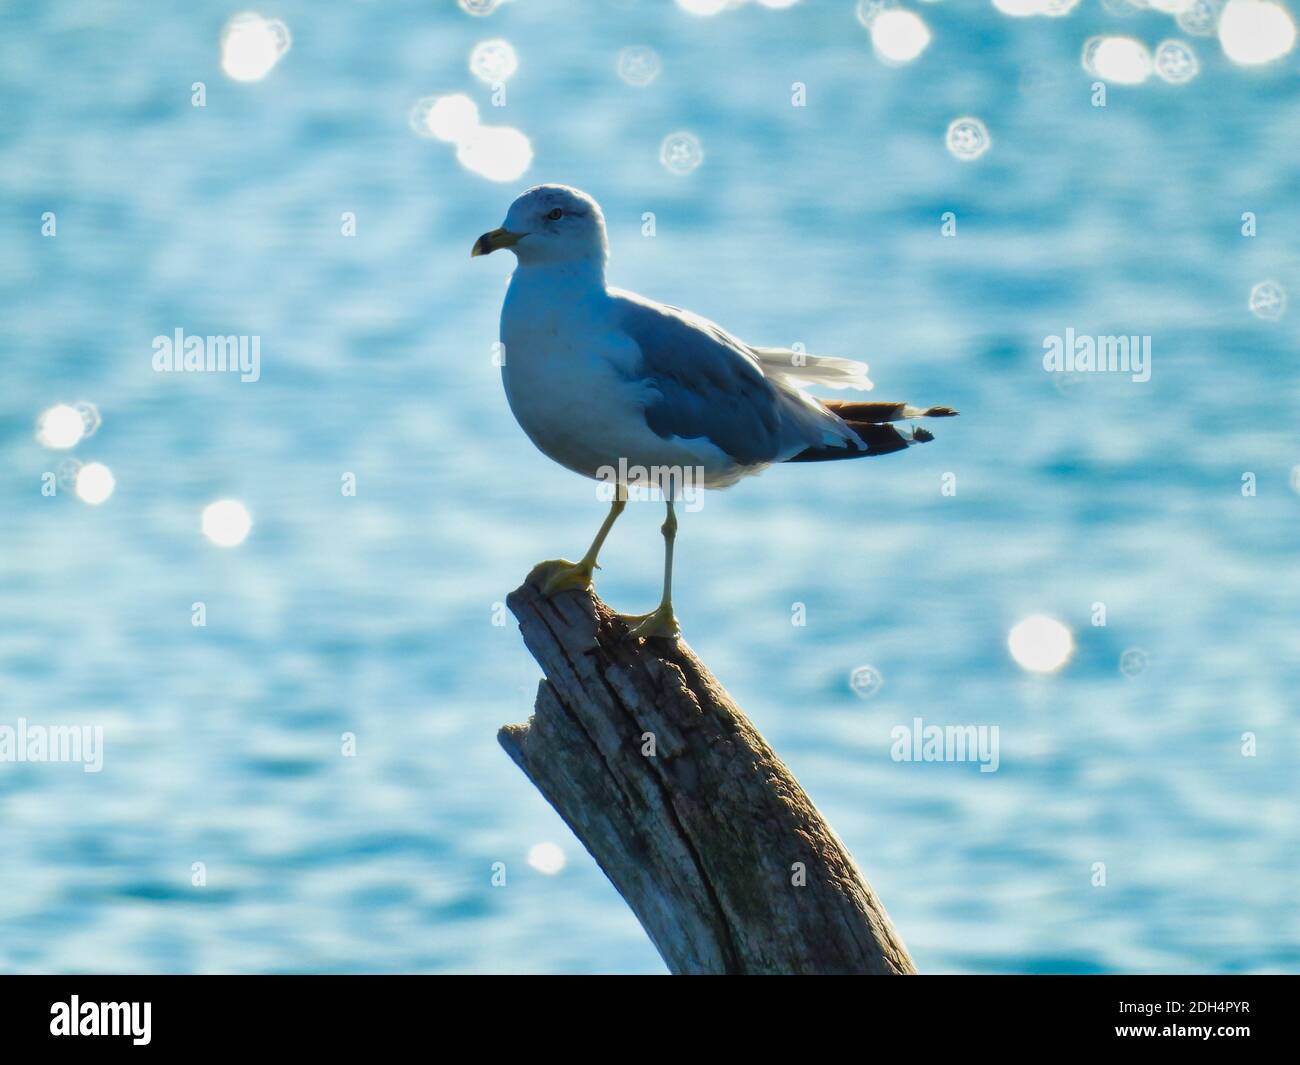 Ring-Billed Gull Seagull Bird Perched on Tree Branch with Glistening Lake Water from Sunny Summer Day Shining in the Background Stock Photo